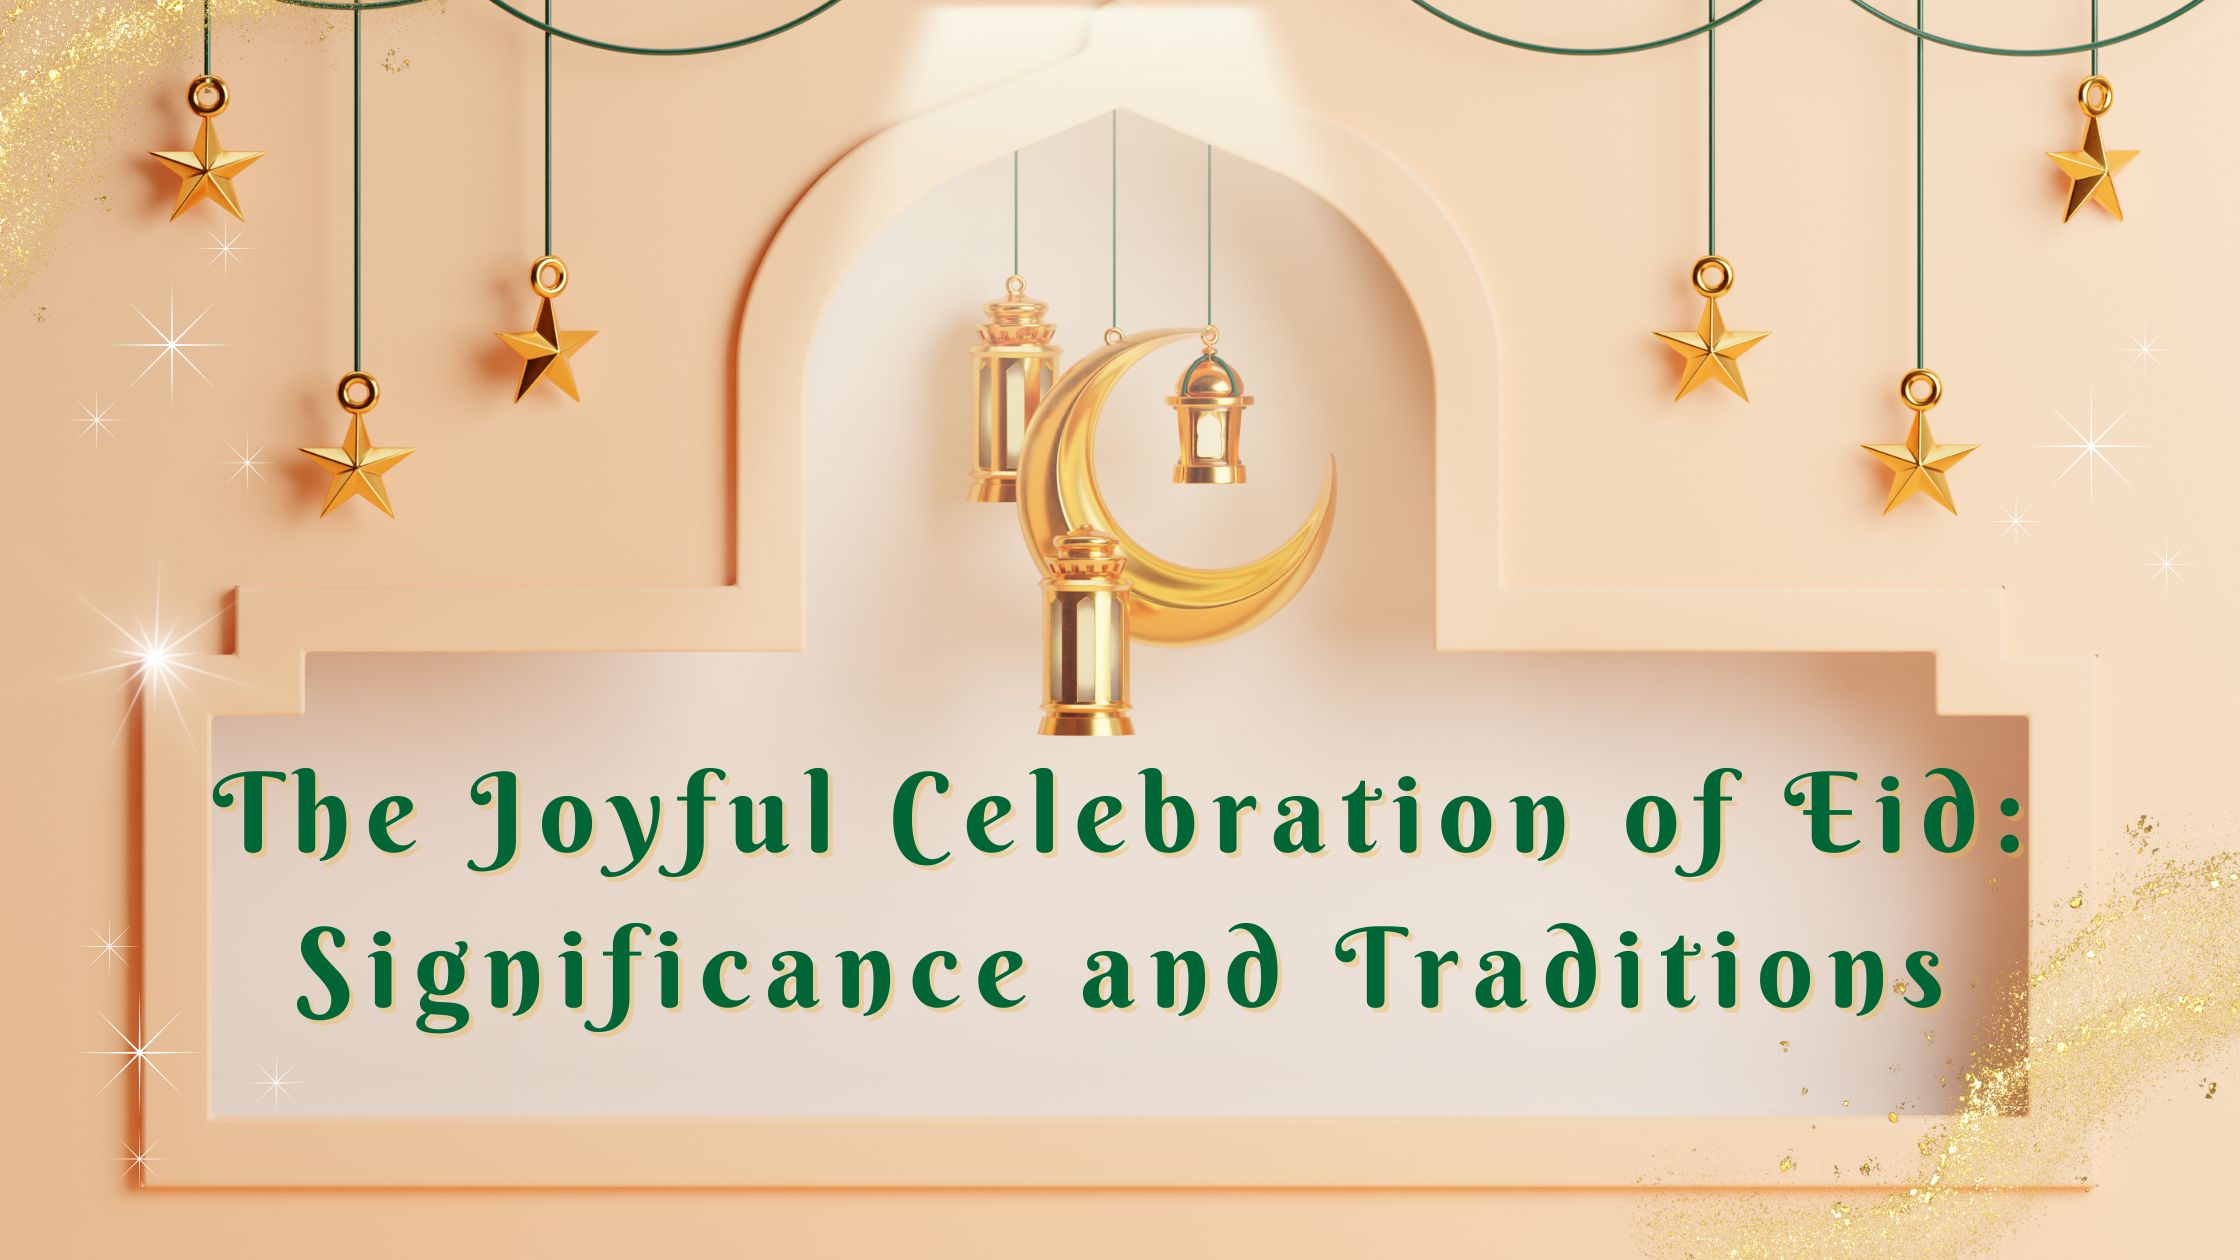 The Joyful Celebration of Eid: Significance and Traditions